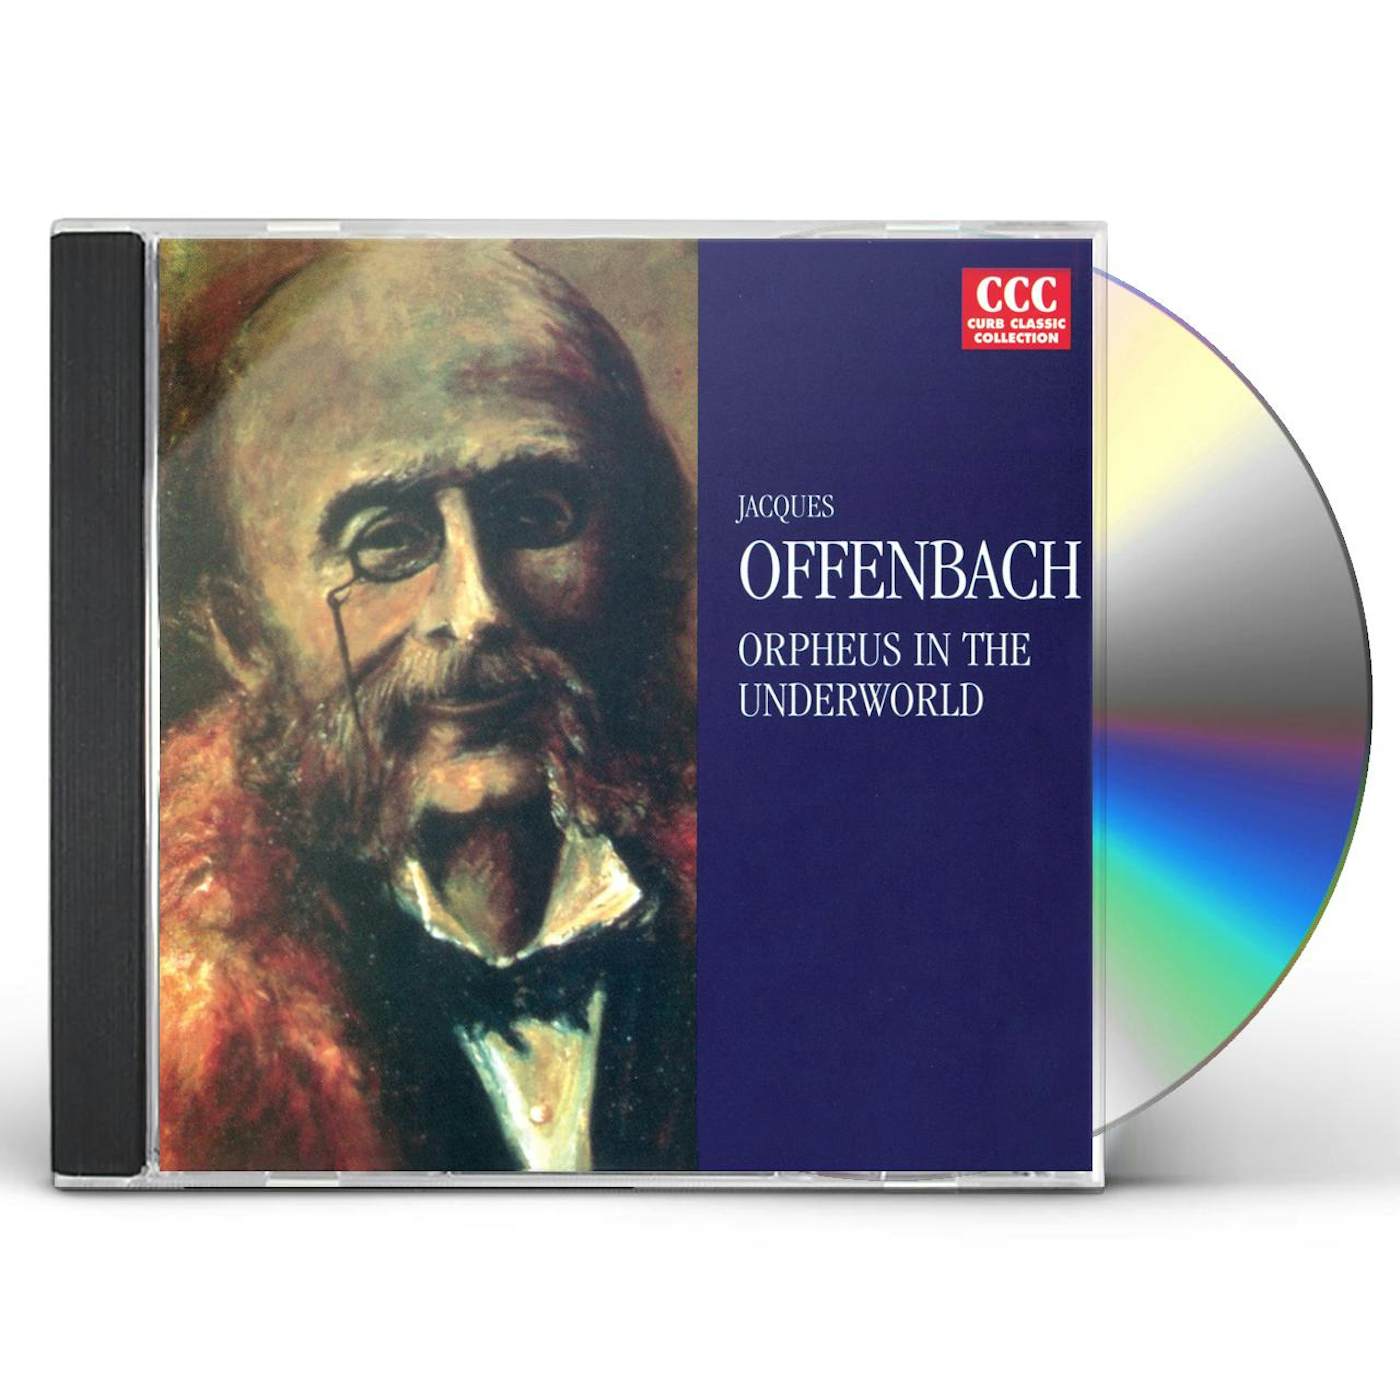 Offenbach ORPHEUS IN THE UNDERWORLD CD